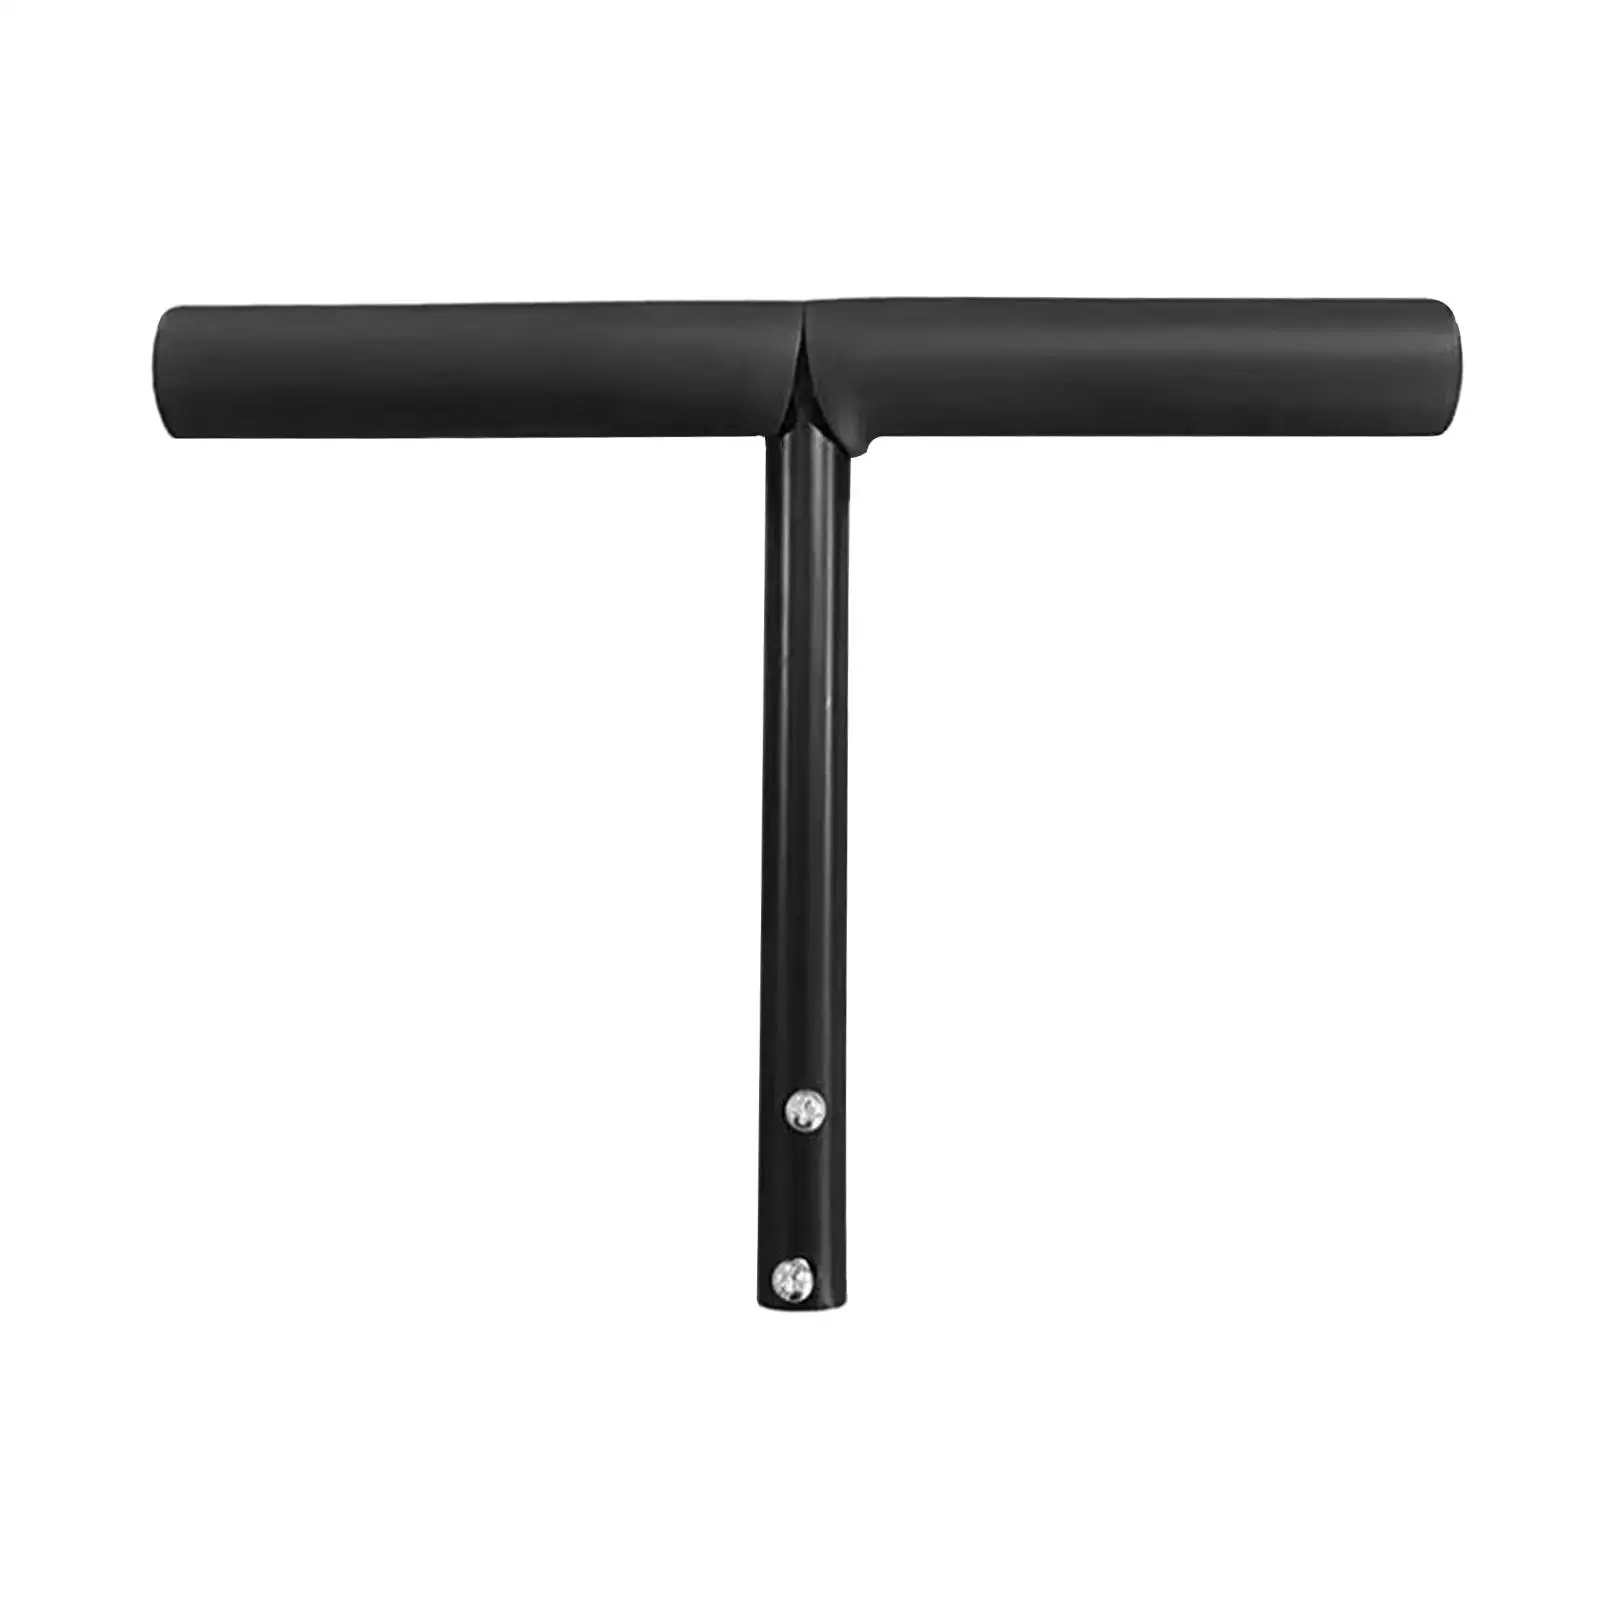 T Shaped Push Handle Bar Sturdy Kids Tricycle Accessories Baby Bike Accessory Replacement Parts for Travel Home Outdoor